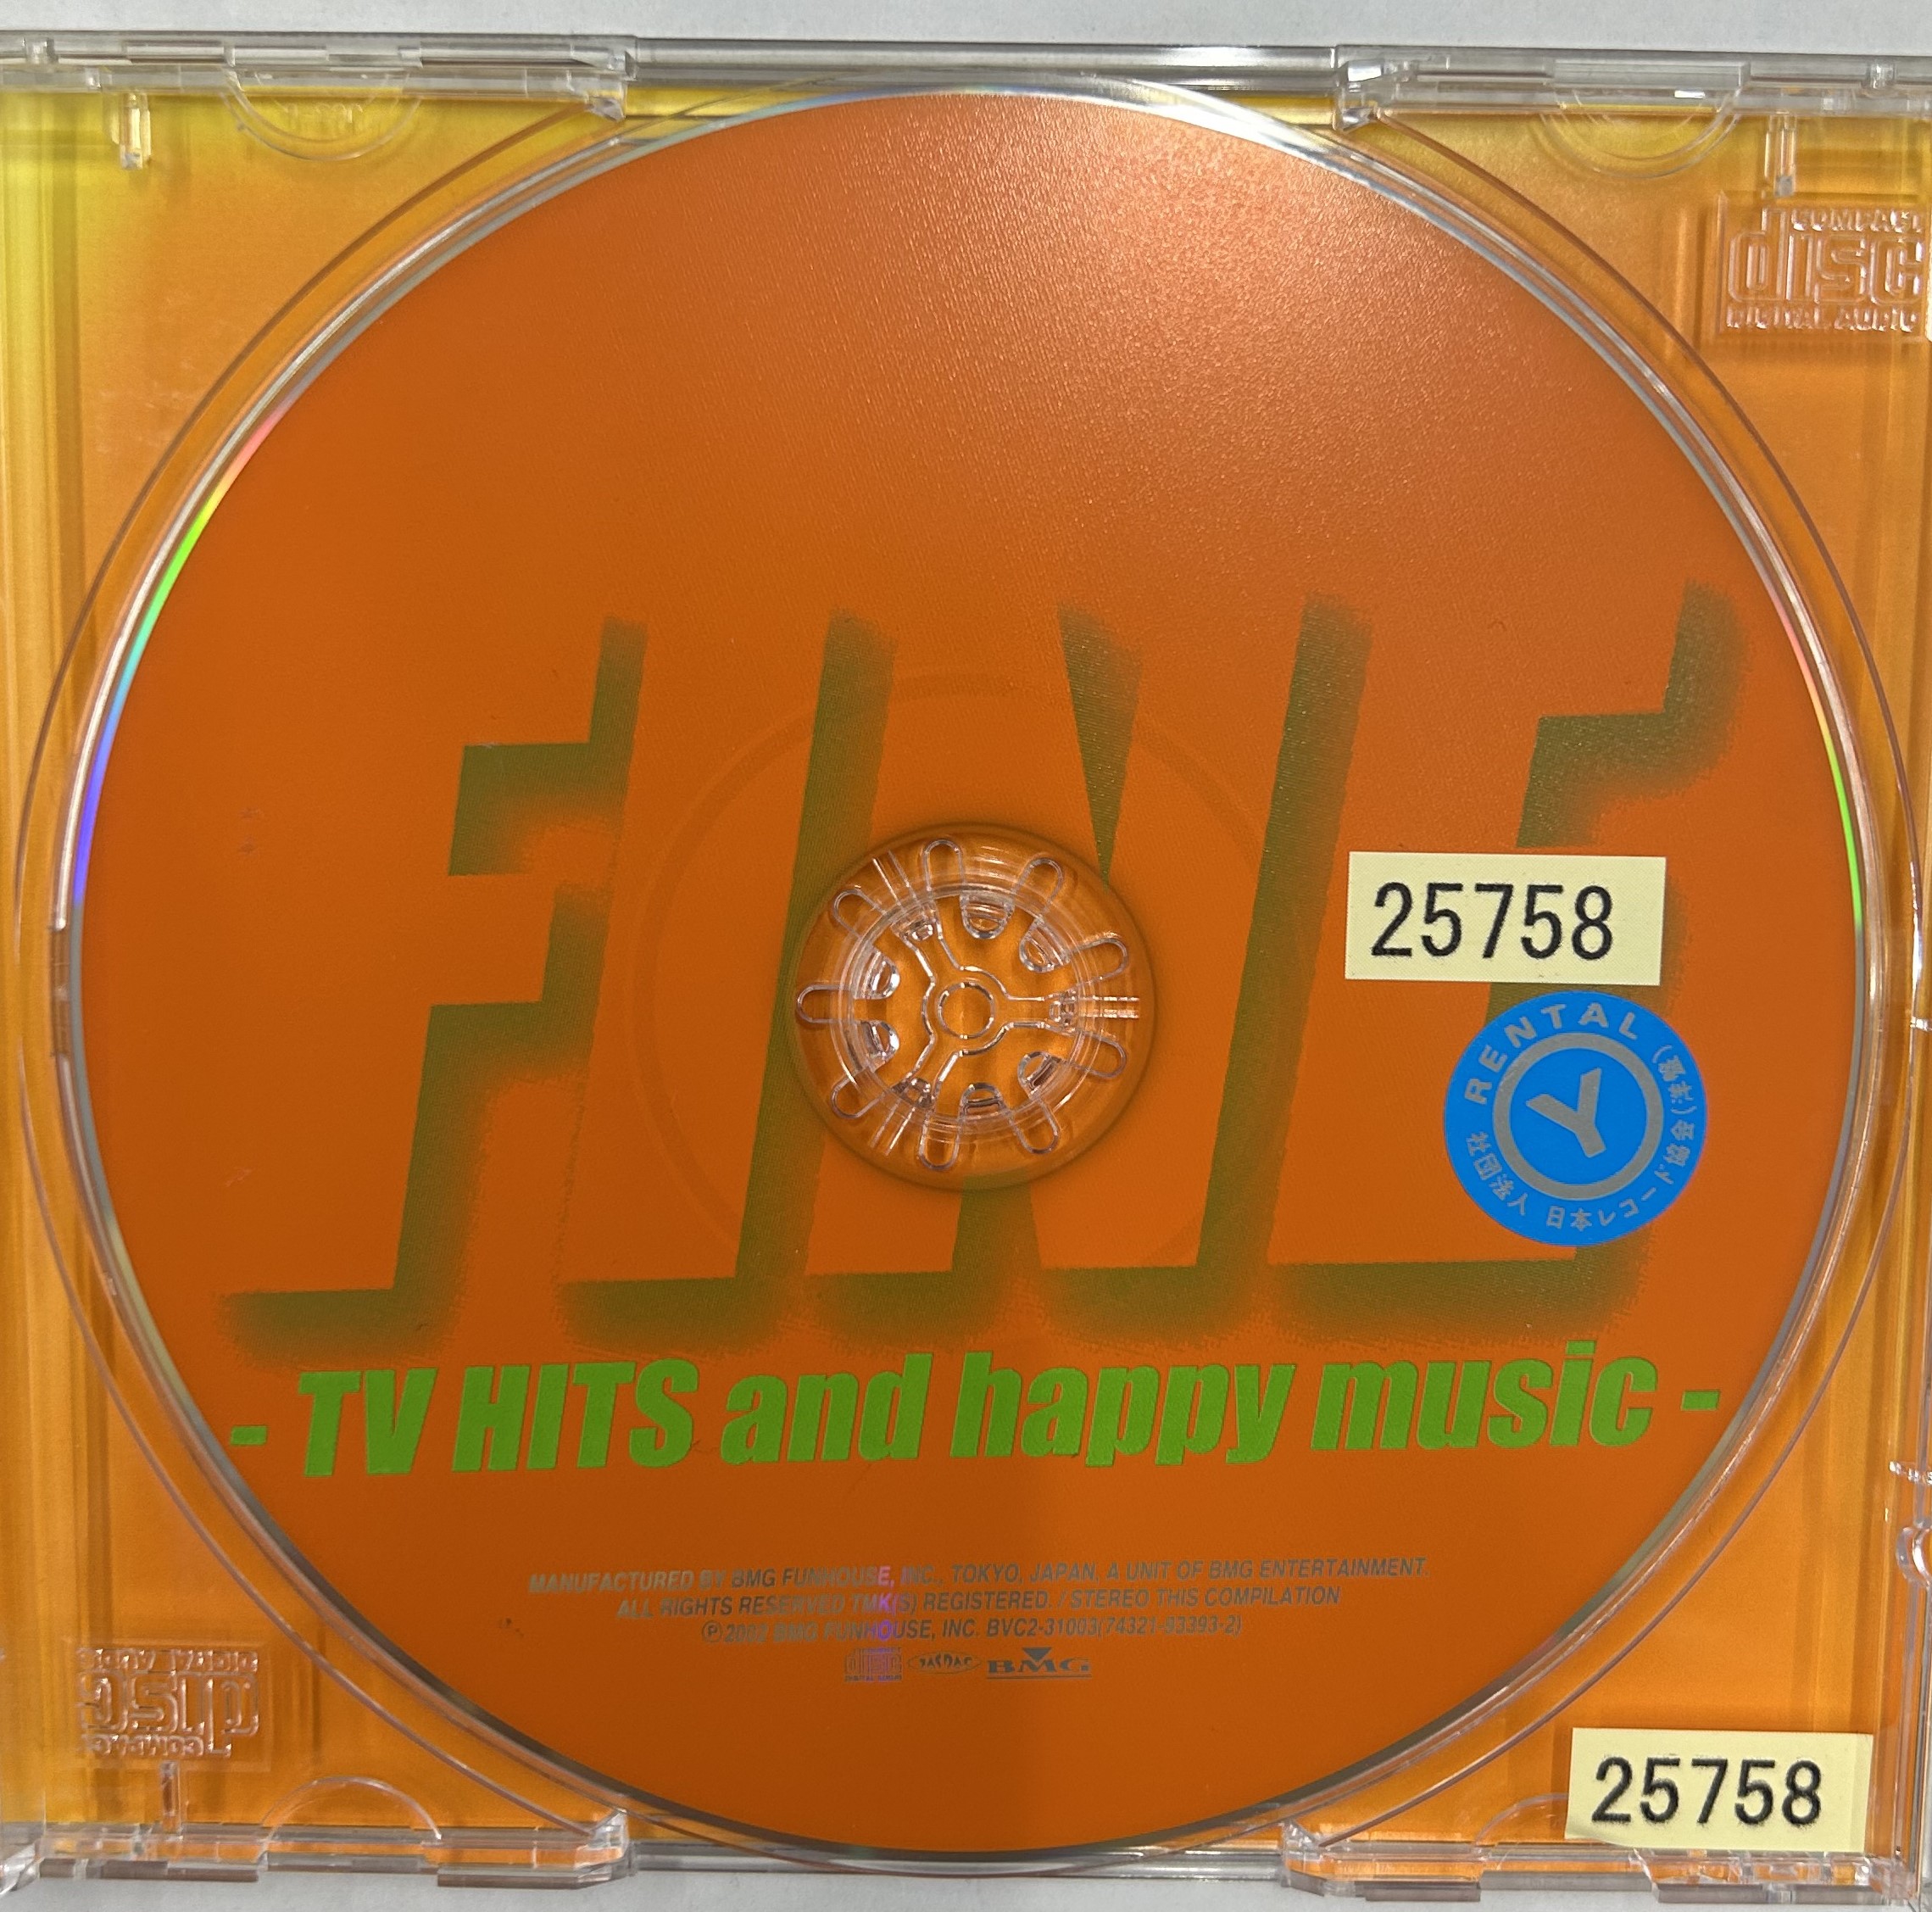 [ free shipping ]cd48587*FINE-TV HITS and happy music-( album )/ secondhand goods [CD]